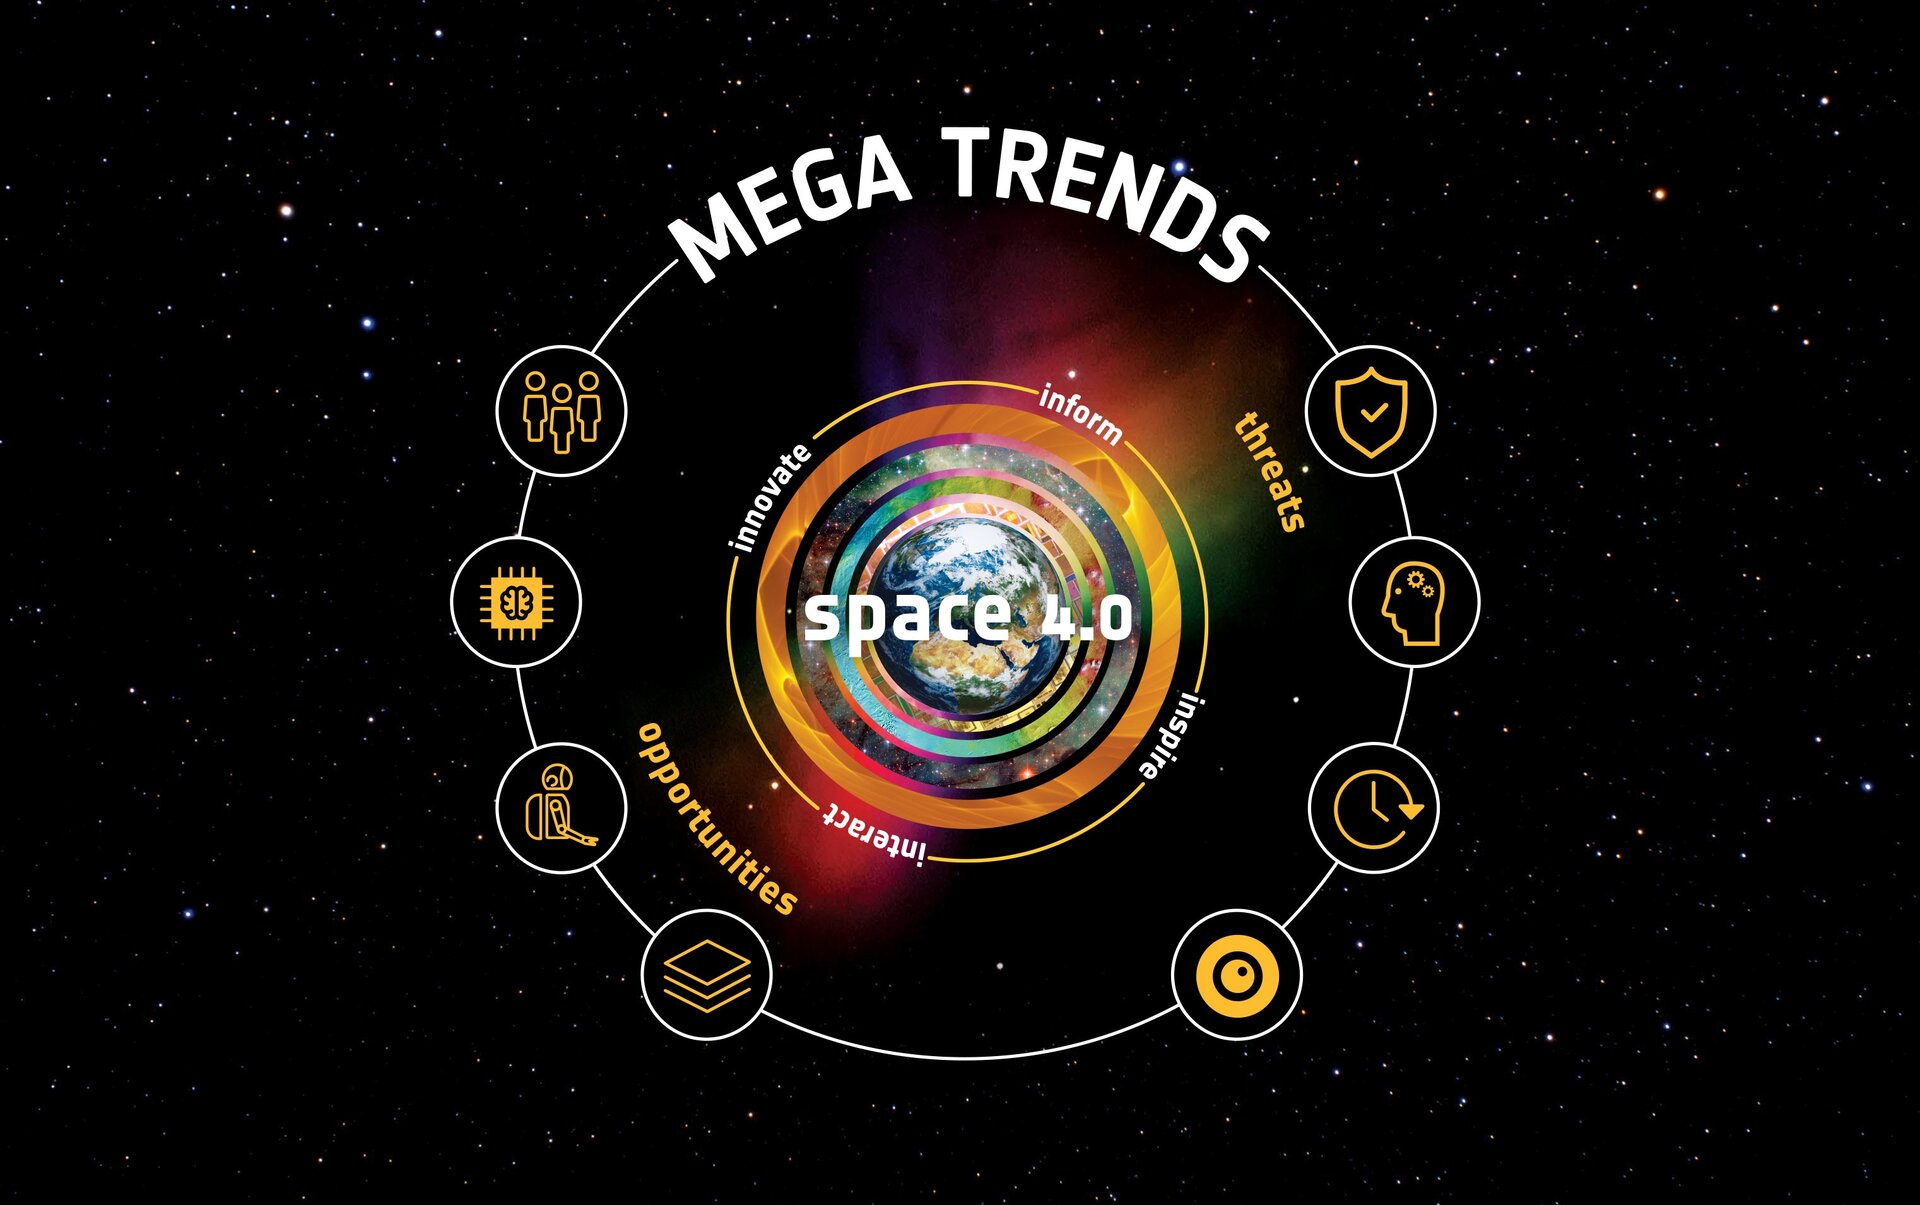 ESA The changing face of space the 'Mega Trends' initiative